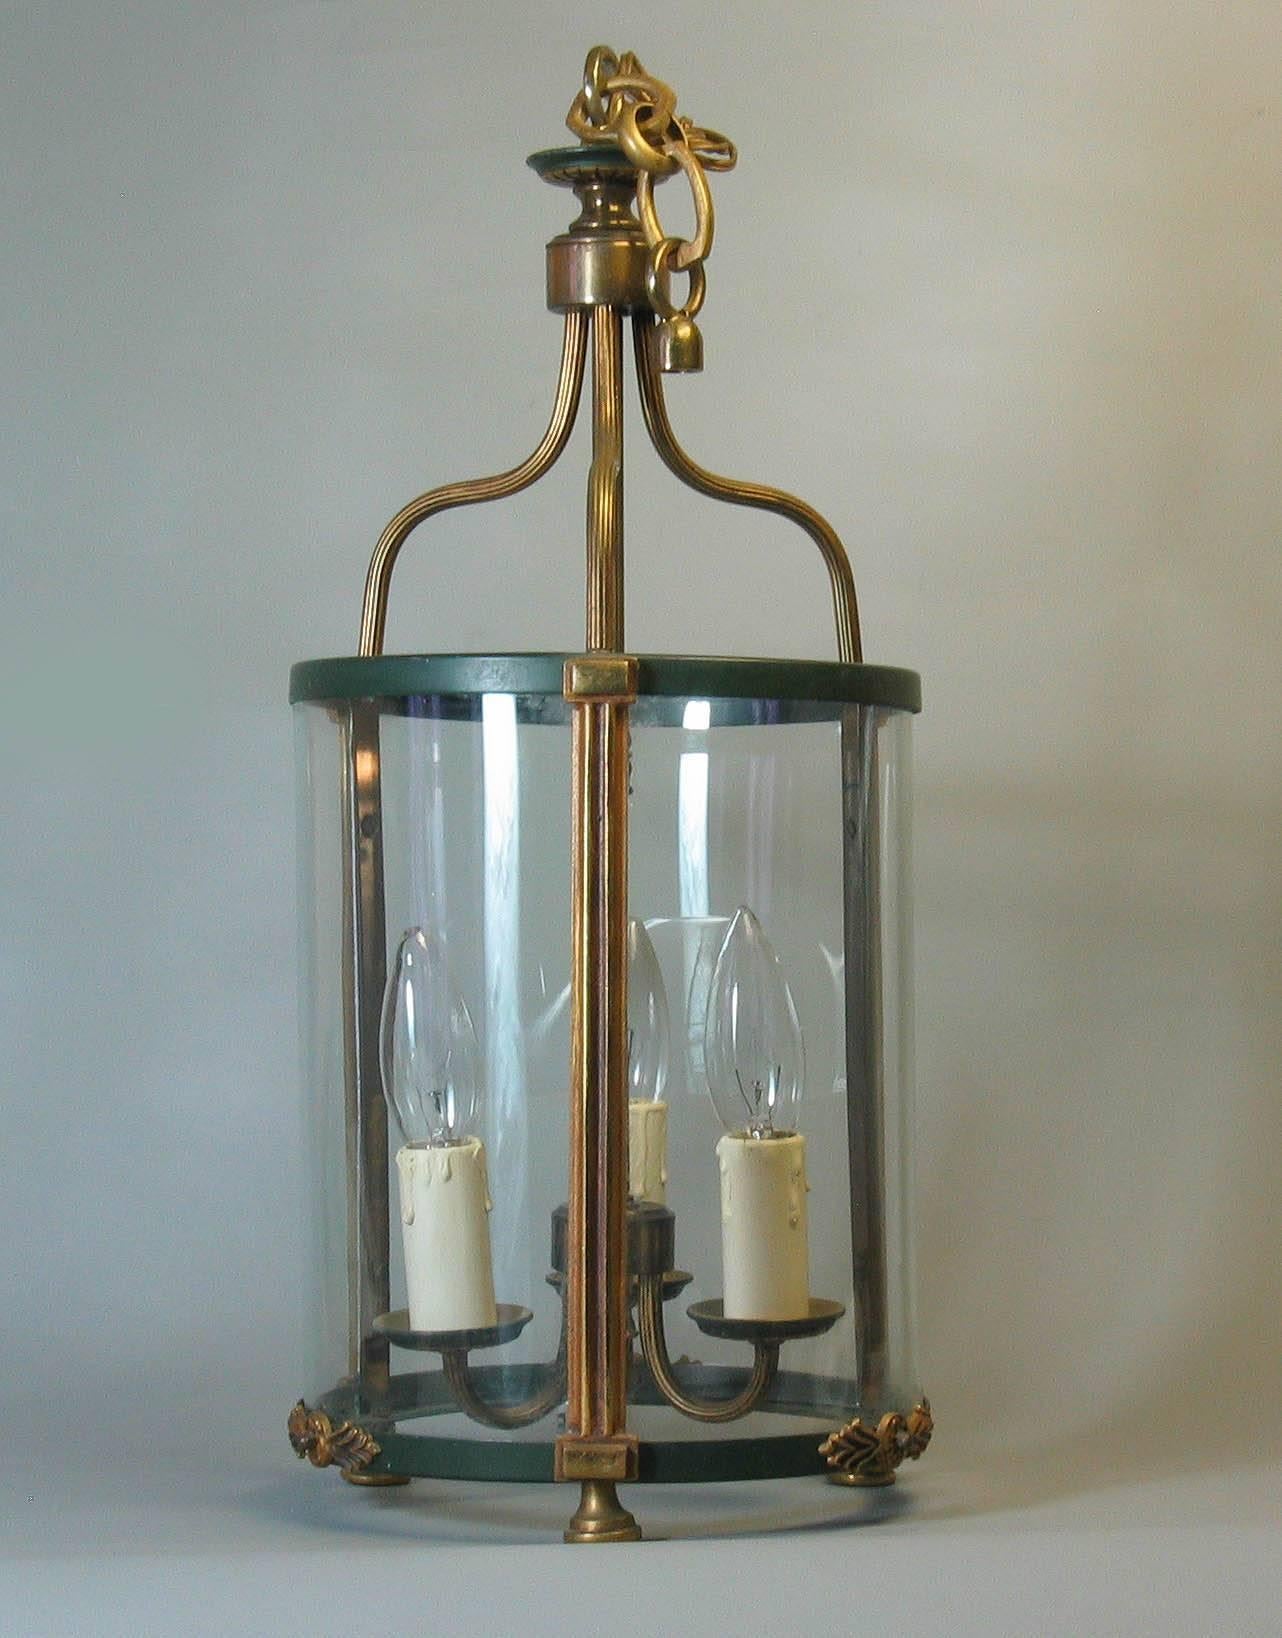 Hand-Crafted Brass Hanging Hall Lantern in Louis XVI Style